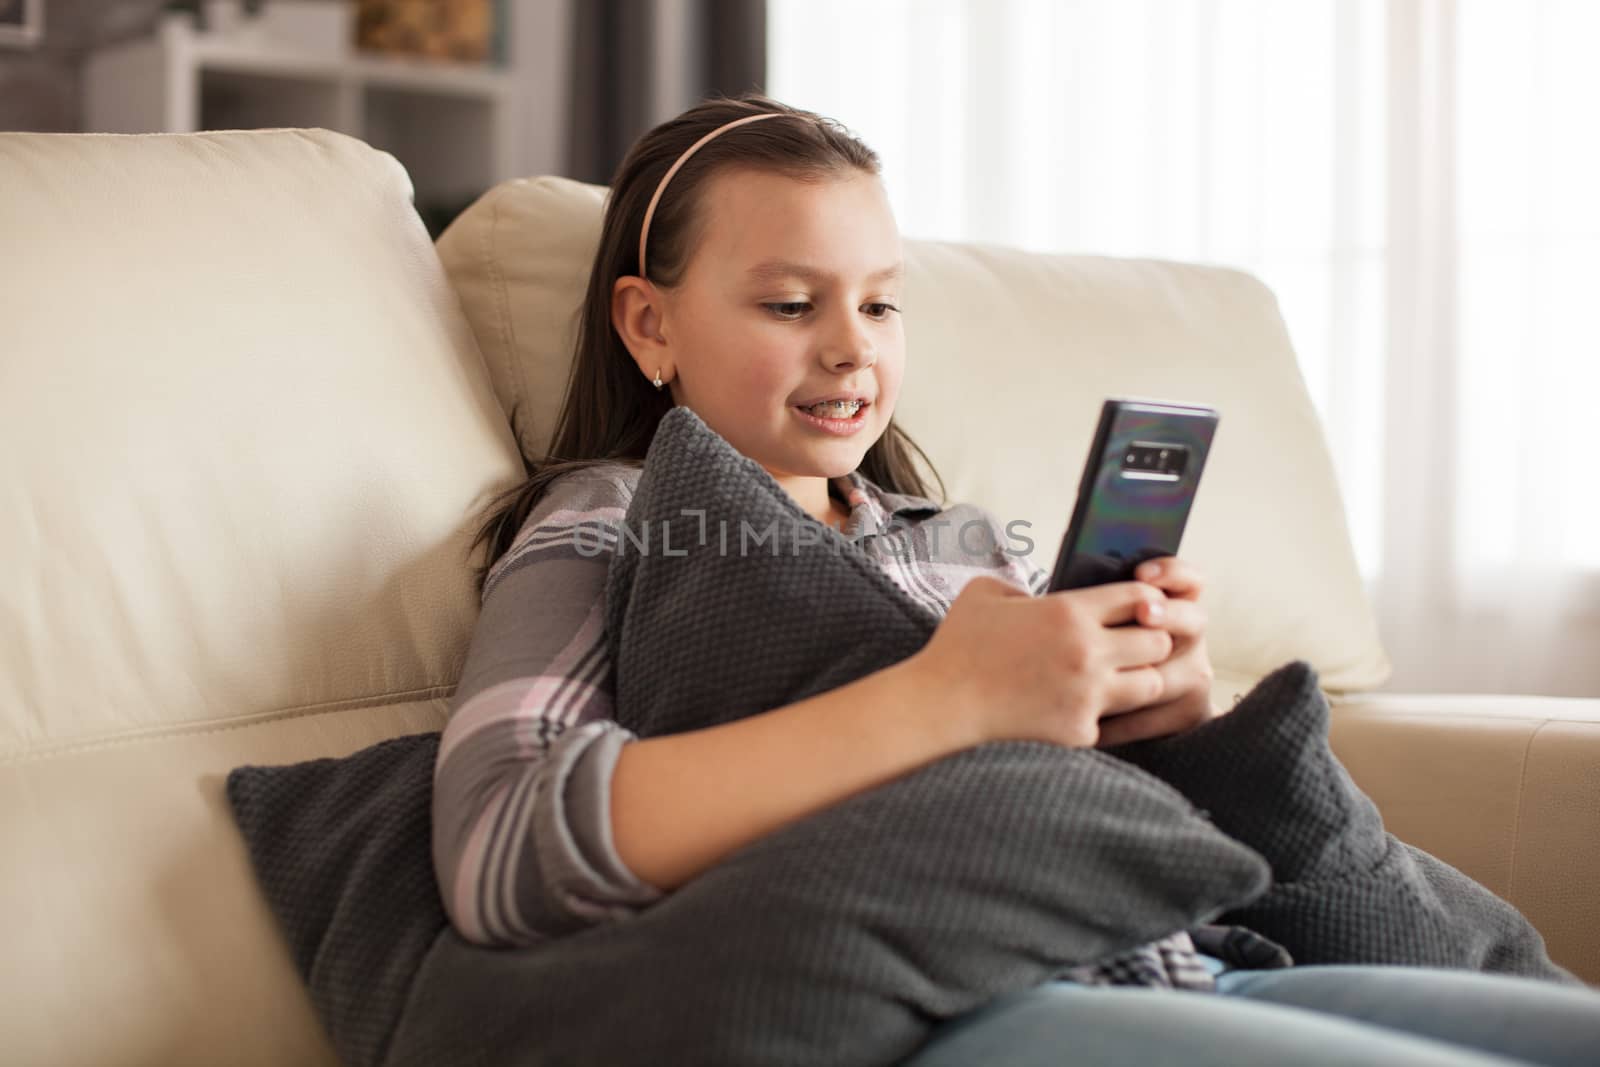 Little girl sitting on the couch in living room texting on smartphone.